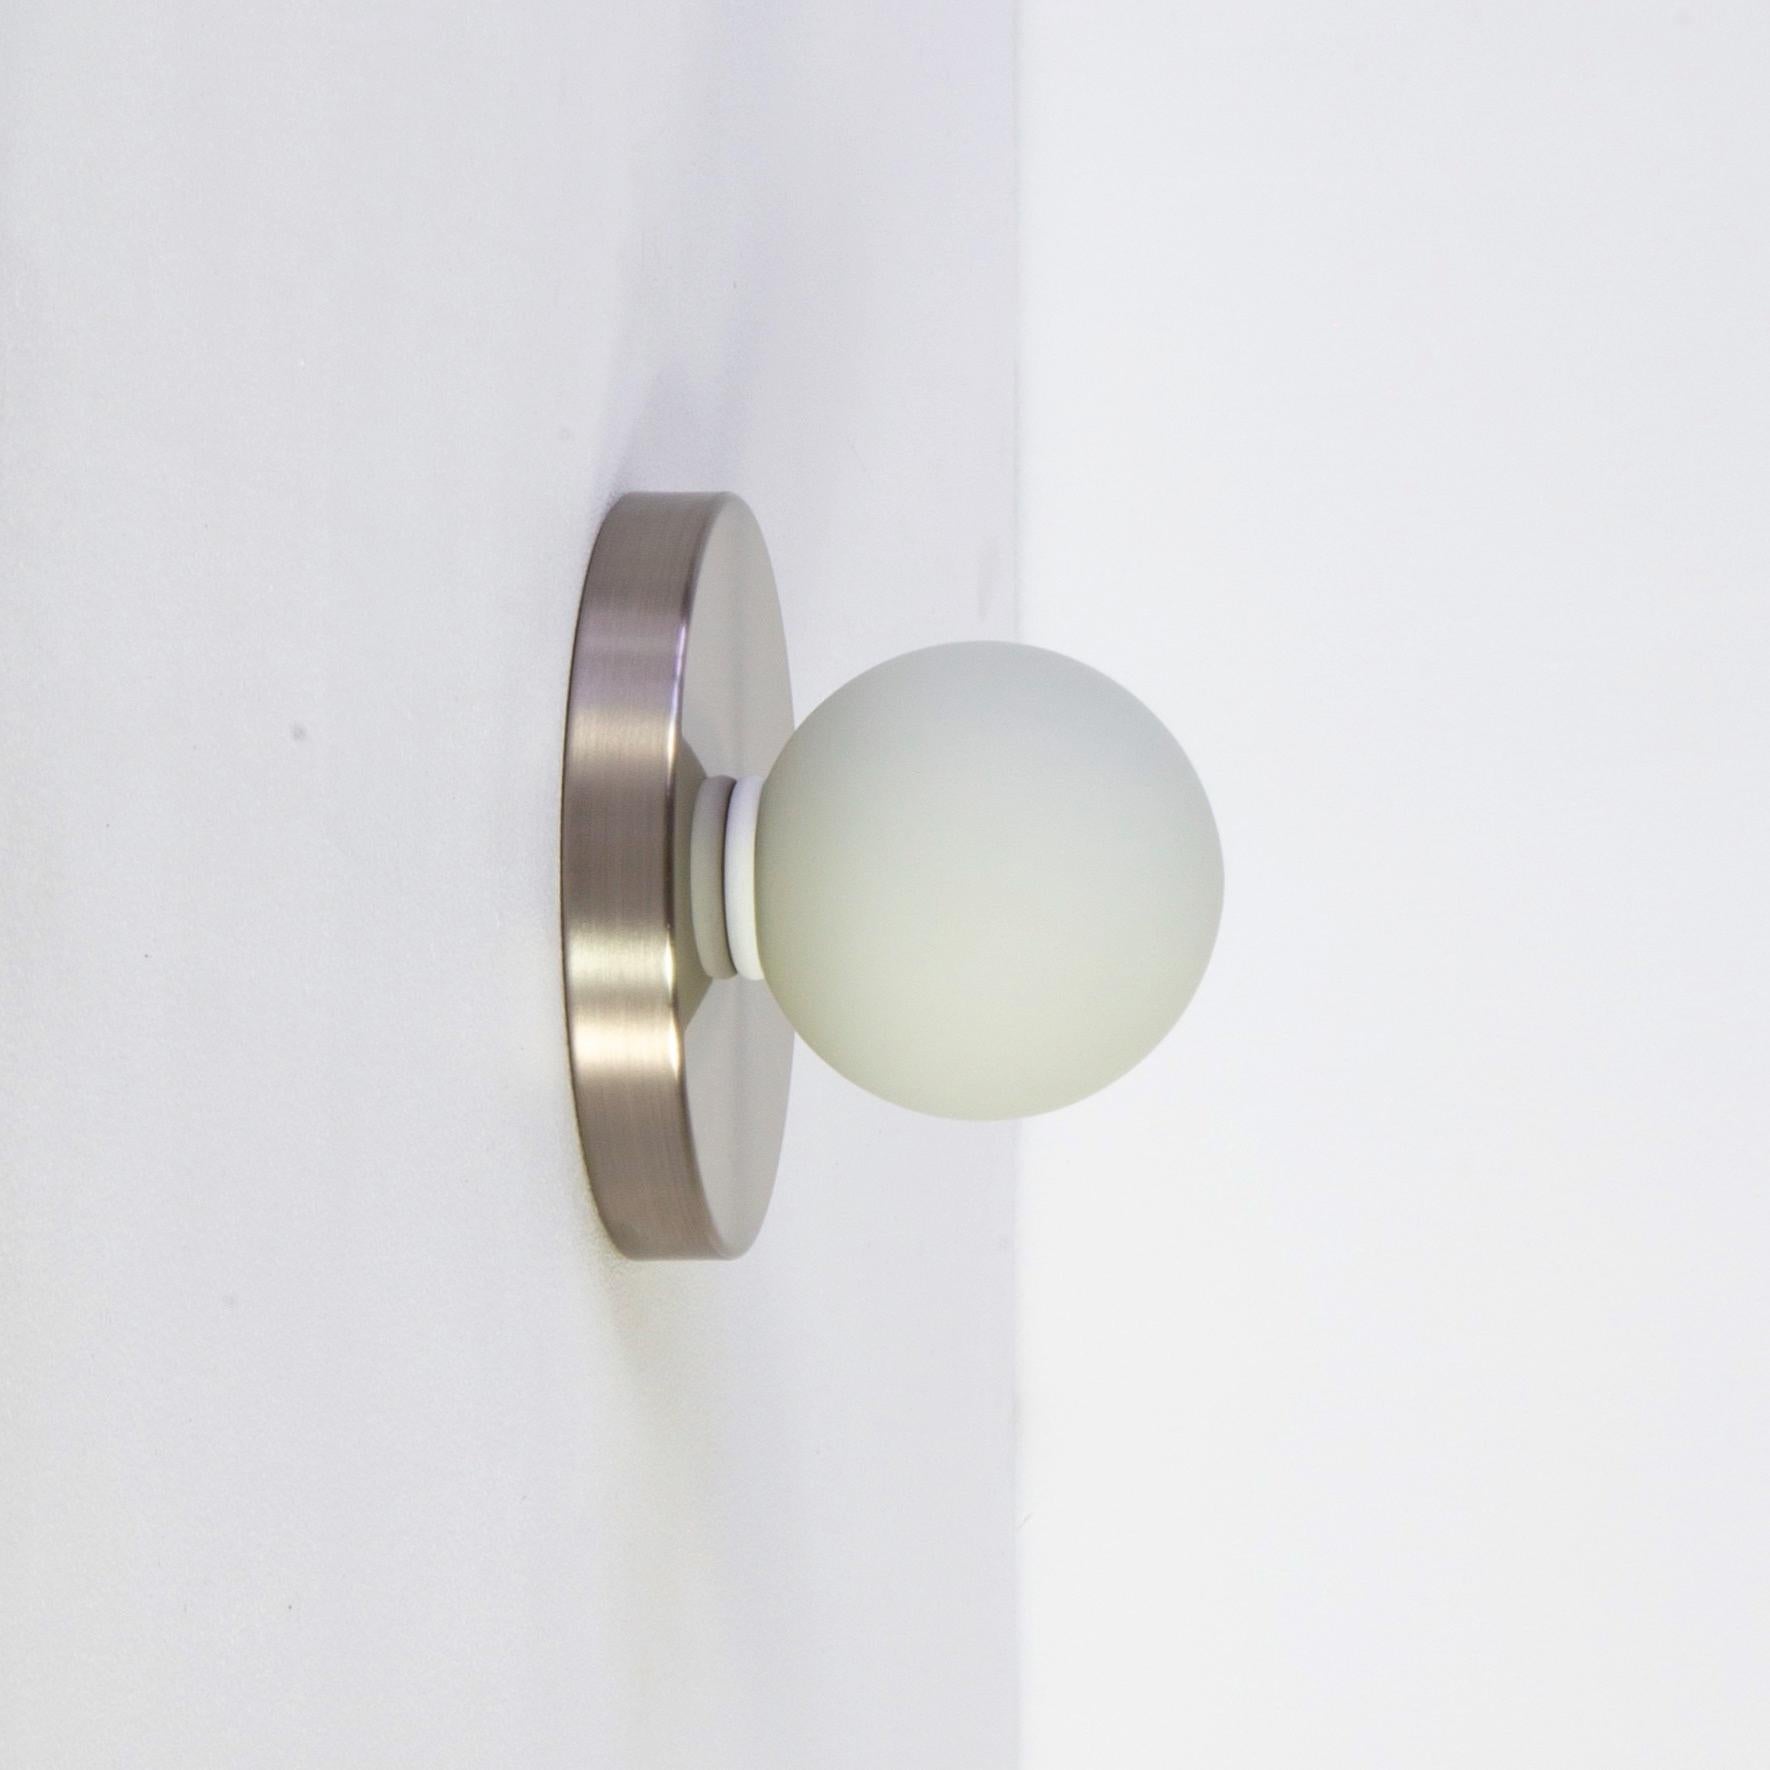 This listing is for 4x Globe Sconces in brushed nickel designed and manufactured by Research.Lighting.

Materials: Brass, Steel & Glass
Finish: Brushed Nickel
Electronics: 1x G9 Socket, 1x 4.5 Watt LED Bulb (included), 450 Lumens
ADA Compliant. UL